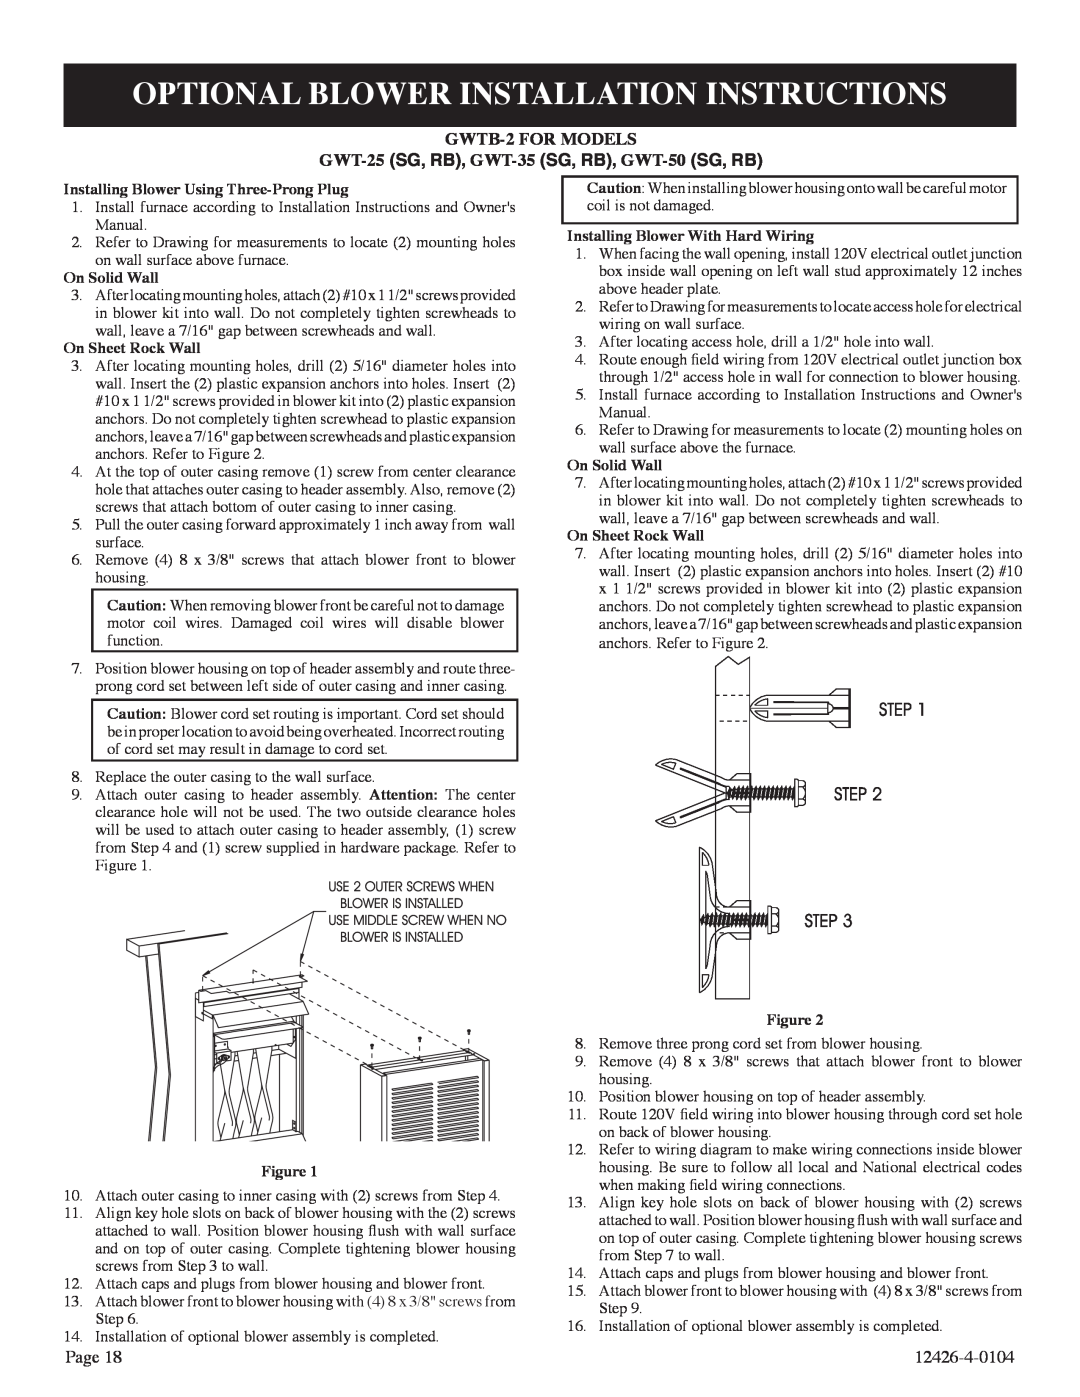 Empire Comfort Systems GWT-50-2, RB) Optional Blower Installation Instructions, Installing Blower Using Three-ProngPlug 